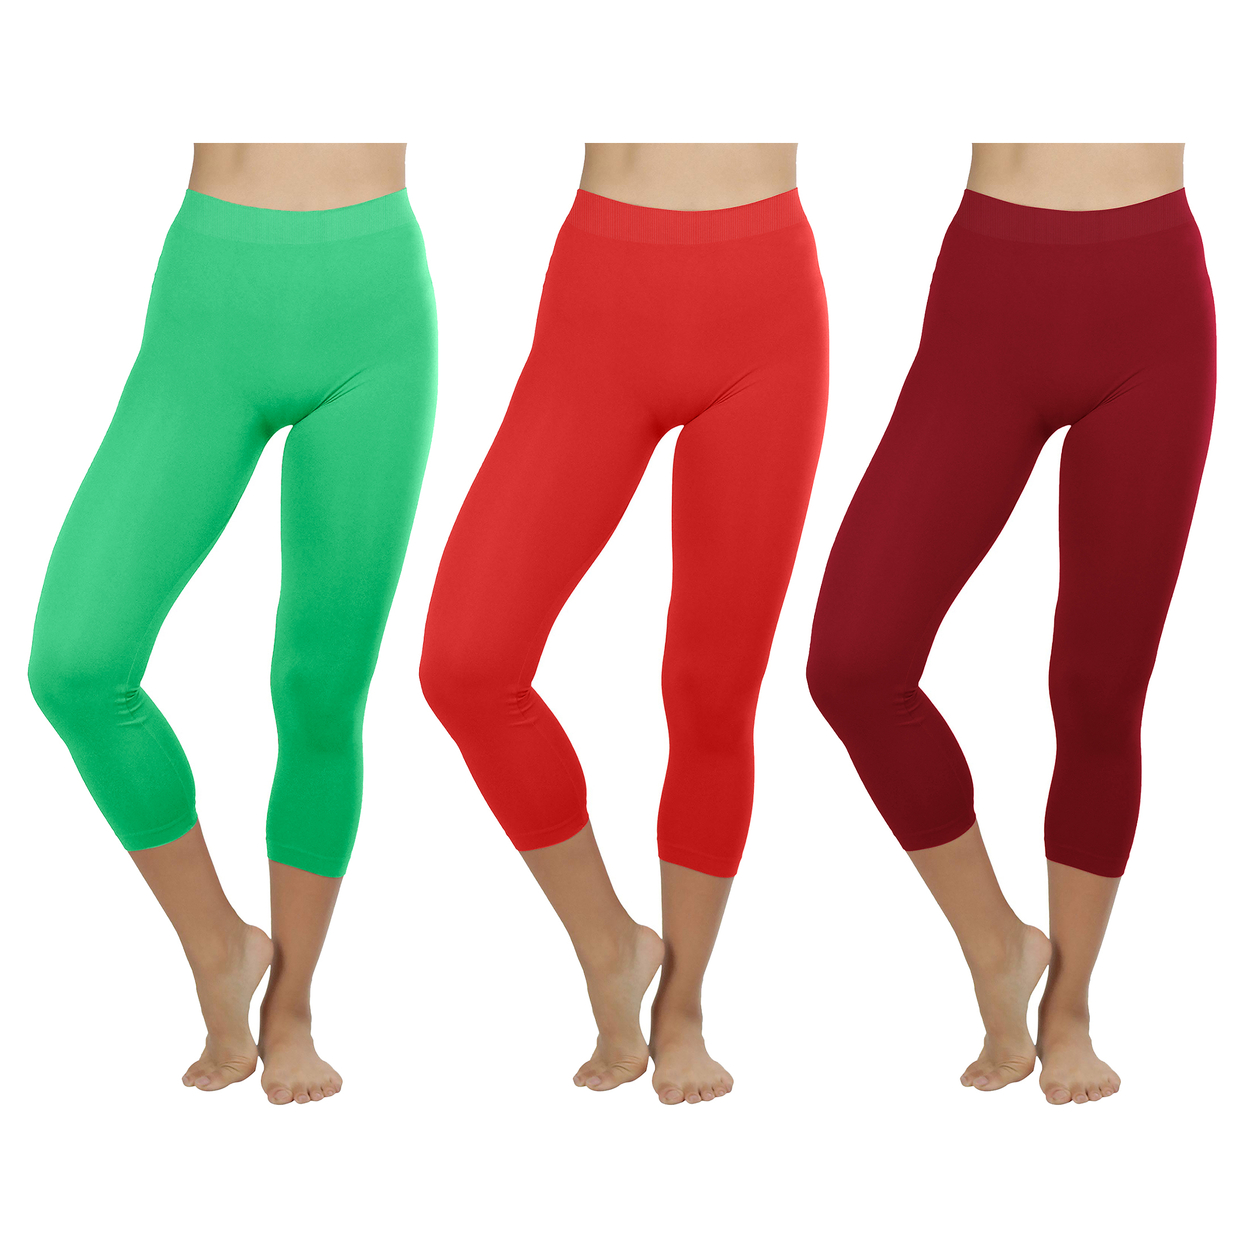 3-Pack: Women's Ultra-Soft High Waisted Smooth Stretch Active Yoga Capri Leggings - Green,red,burgundy, Large